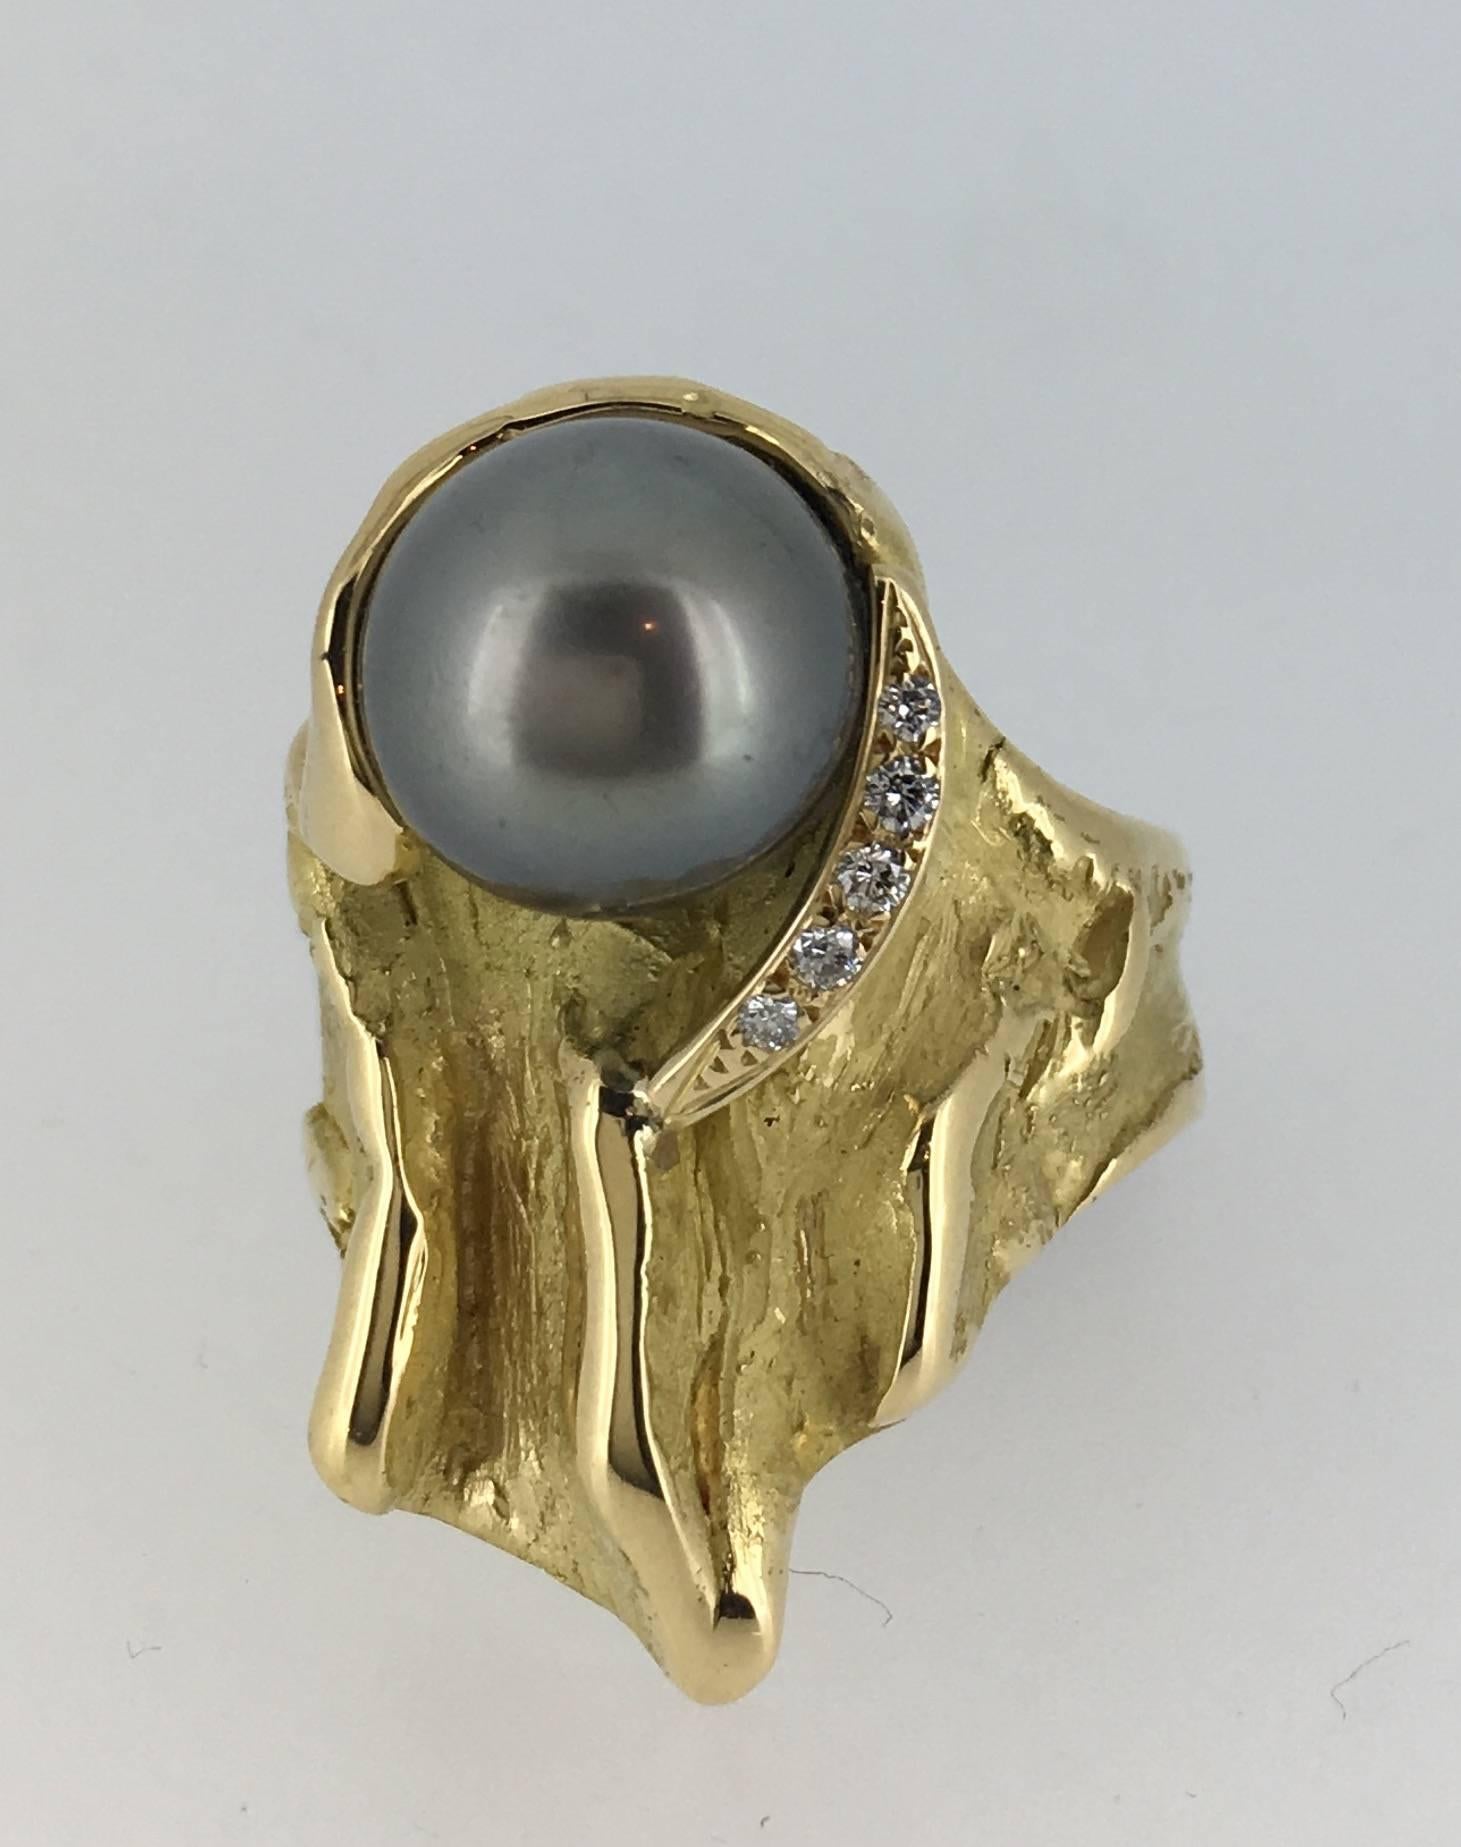 This Modernist one of a kind ring was designed and made by Steven in the Antwerp workshop using the best quality pearl and 5 diamonds of a total 0.10 ct.
This beauty can be worn in various occasion with a touch of Class.
The size of the finger is